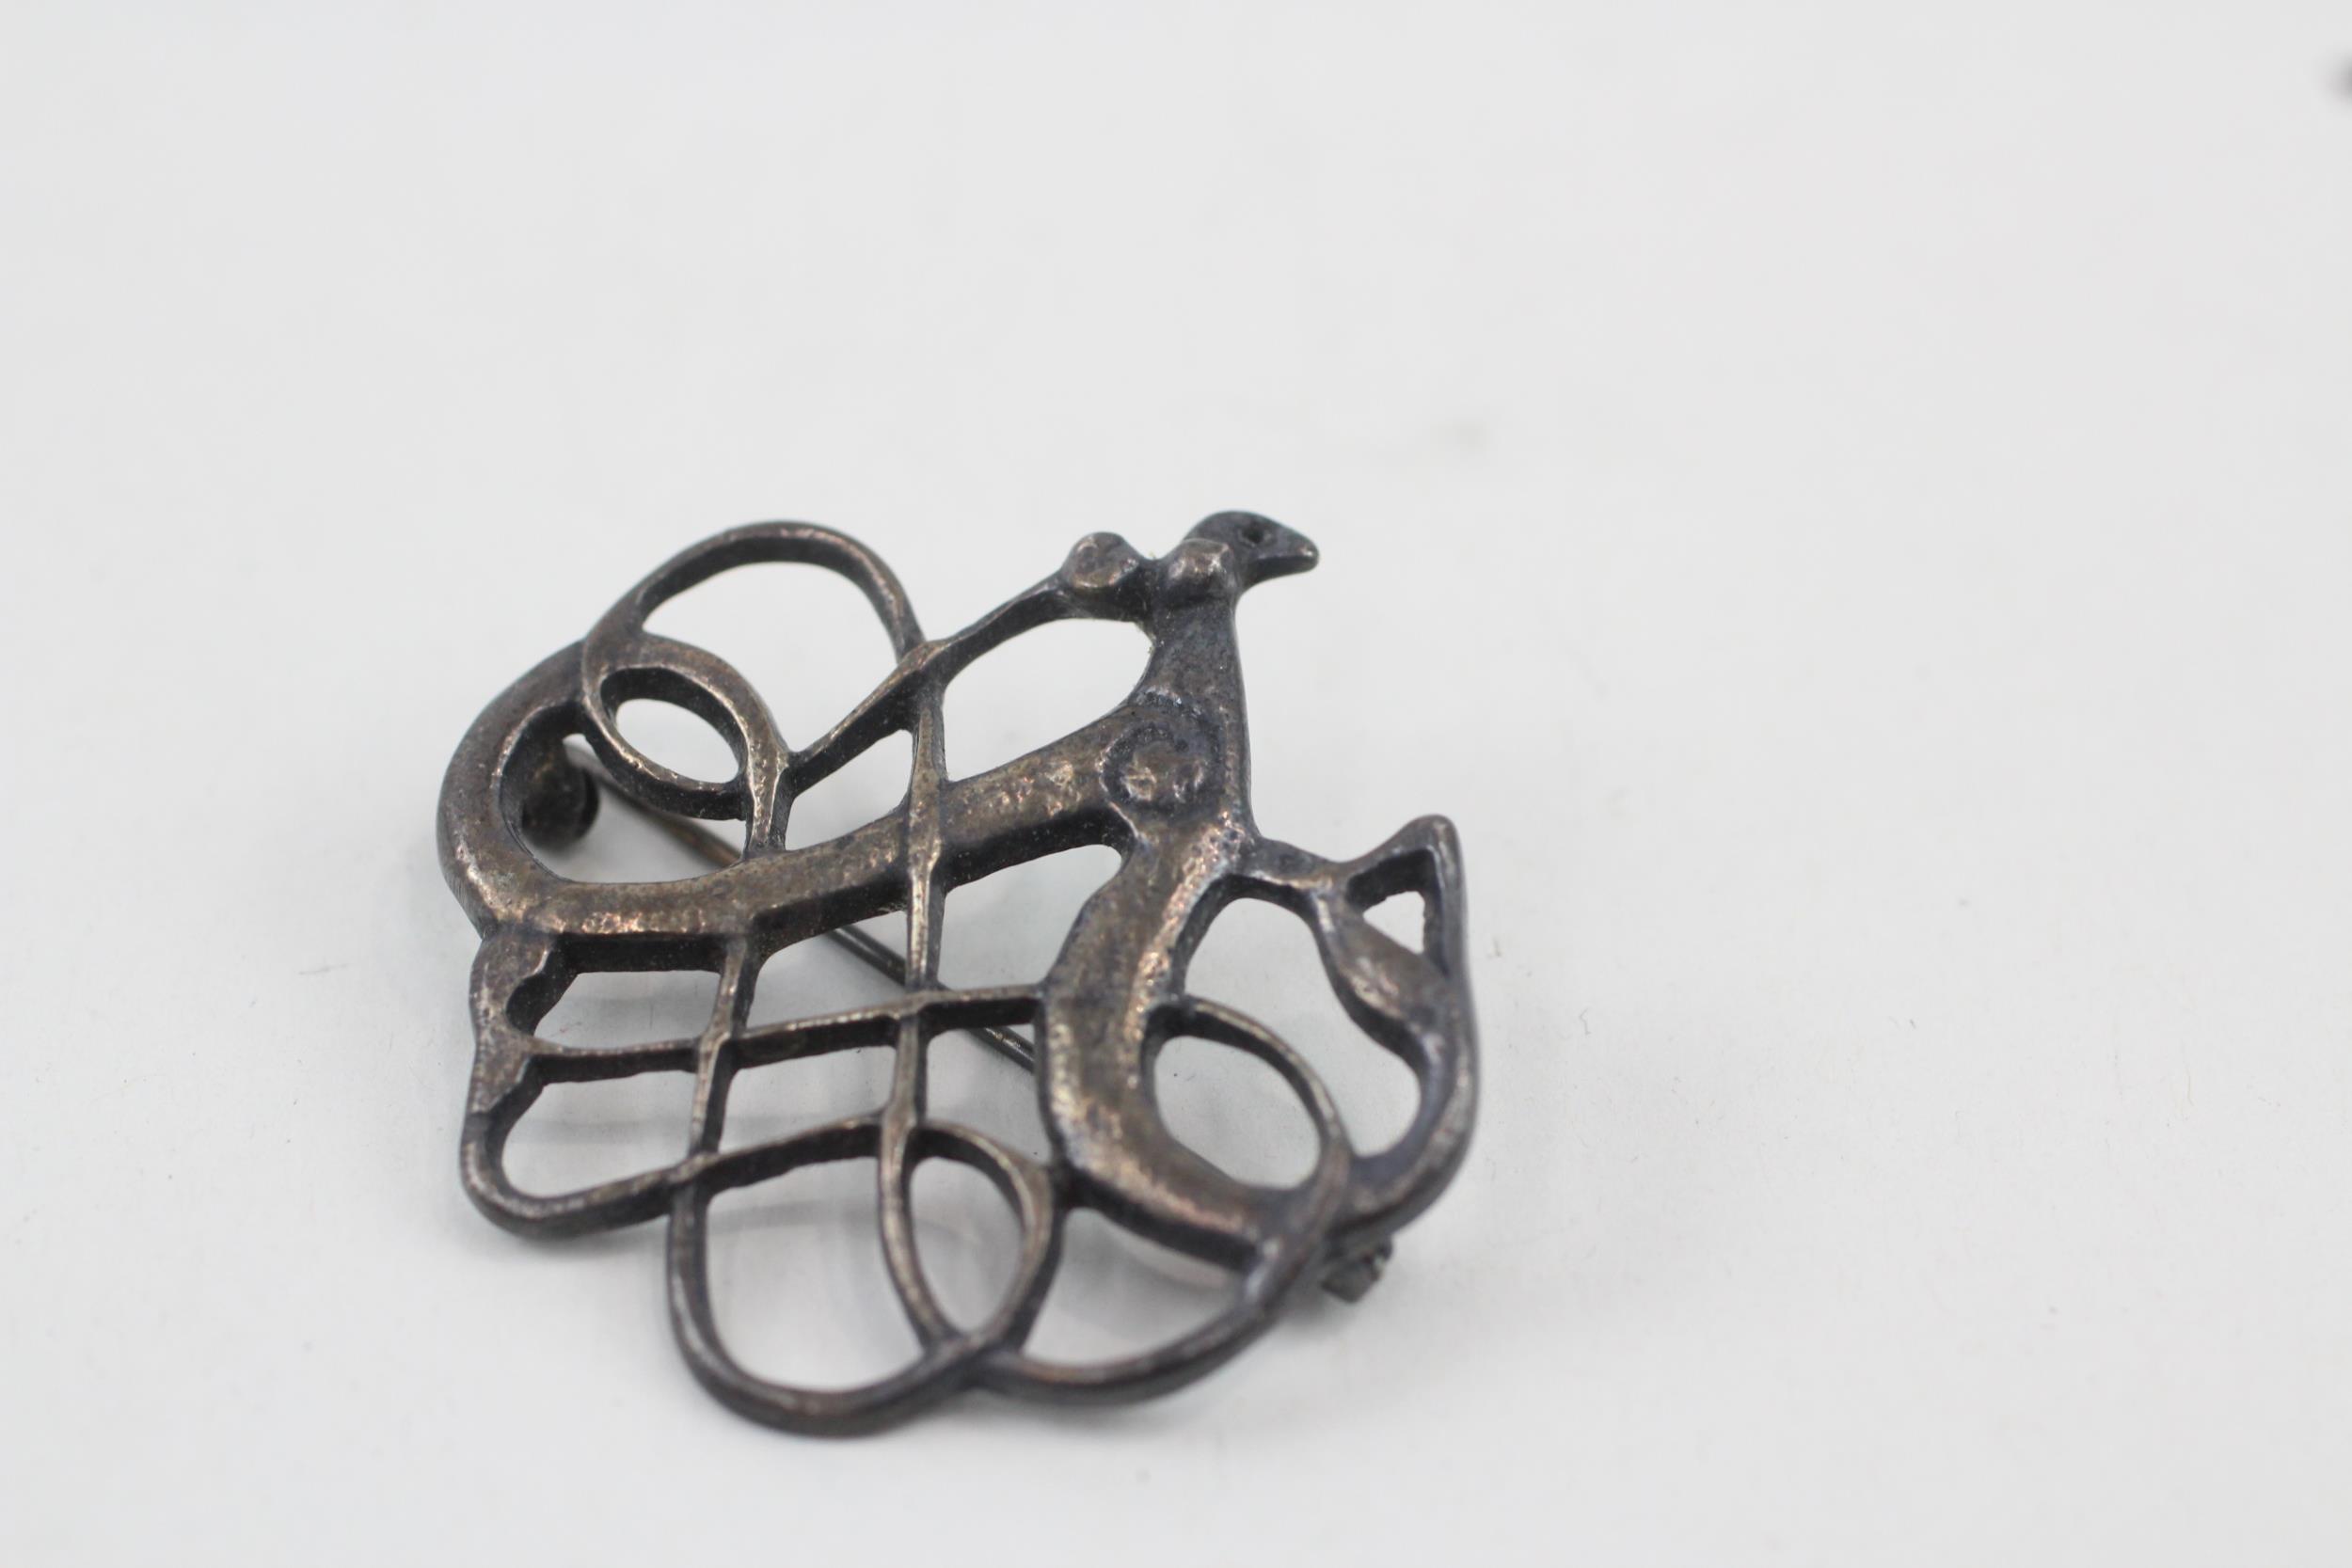 Silver Viking replica brooch by David Anderson (10g) - Image 2 of 6